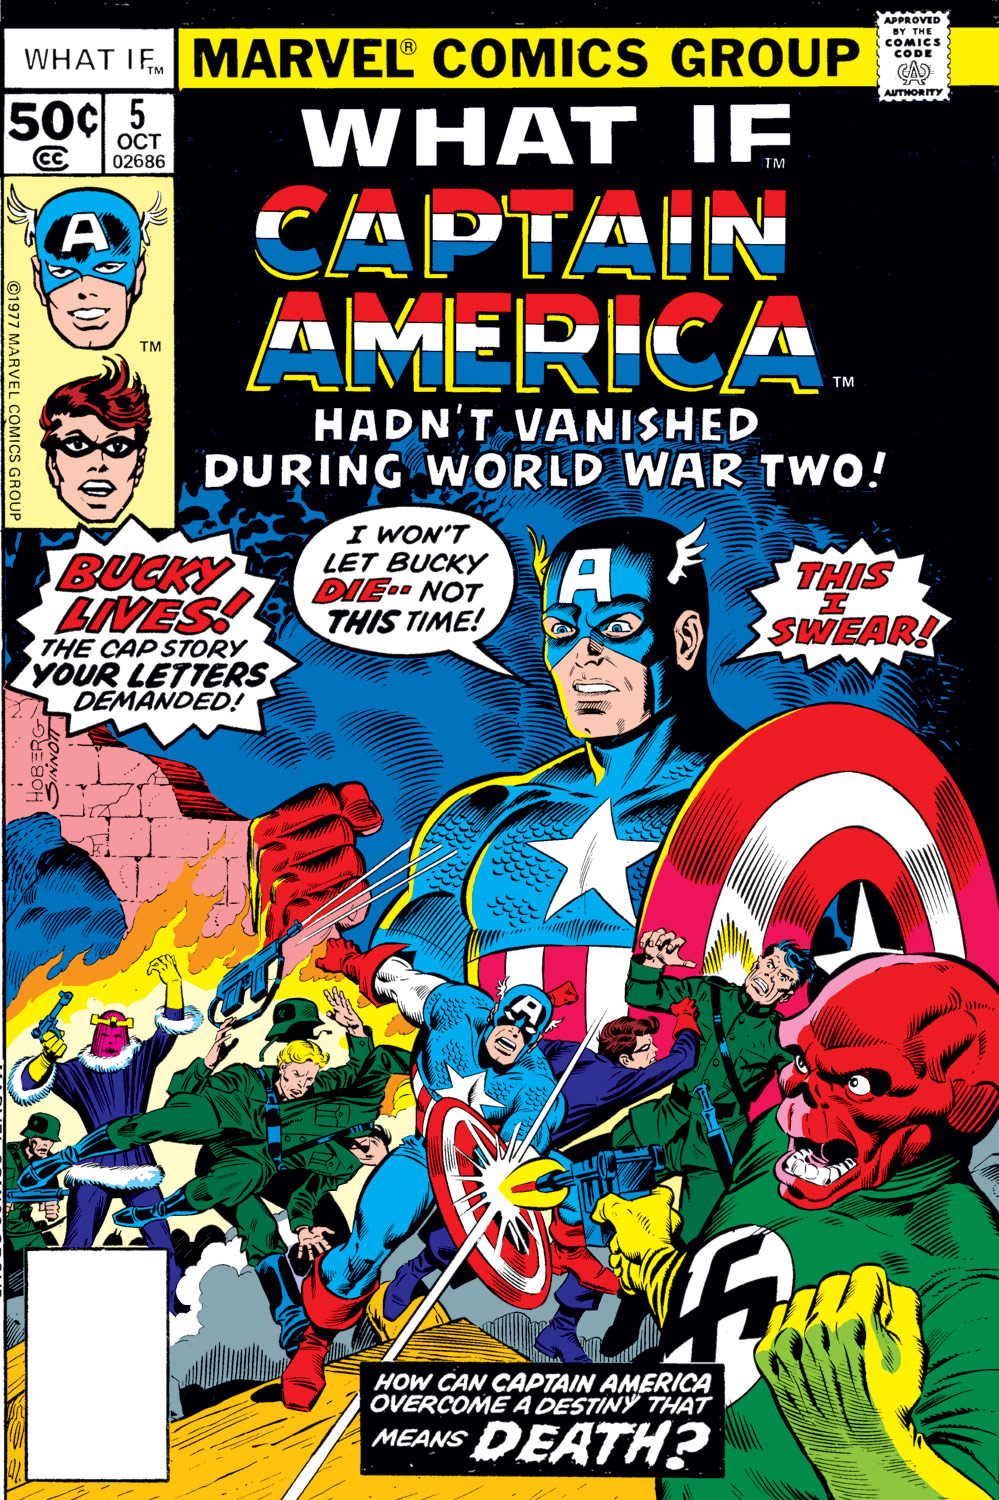 <{ $series->title }} issue 5 - Captain America hadn't vanished during World War Two - Page 1